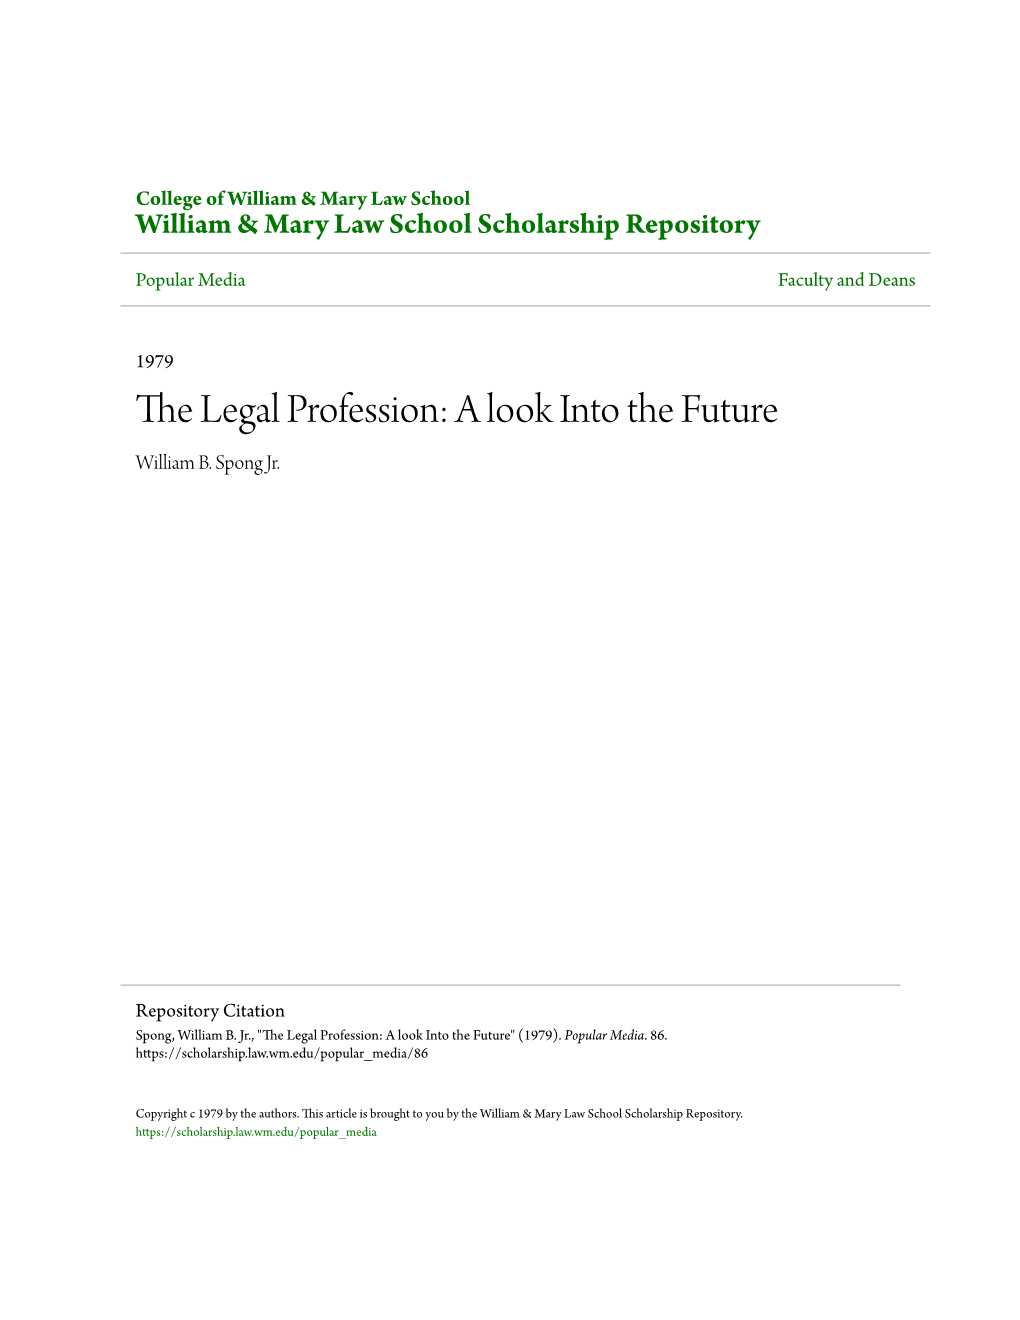 The Legal Profession: a Look Into the Future William B